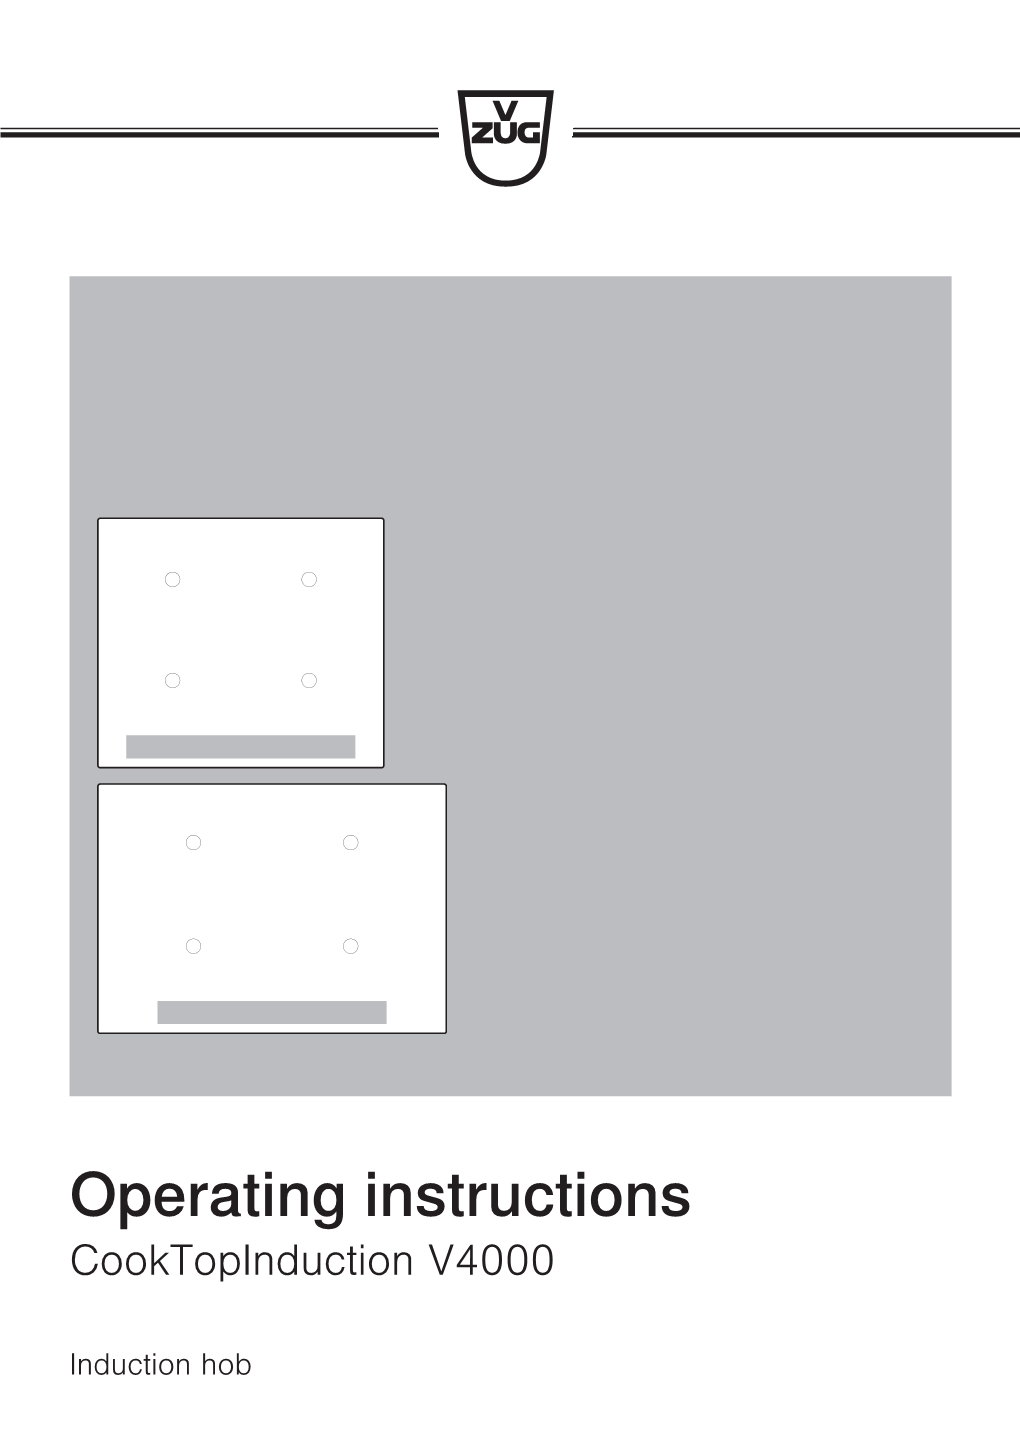 Operating Instructions Cooktopinduction V4000